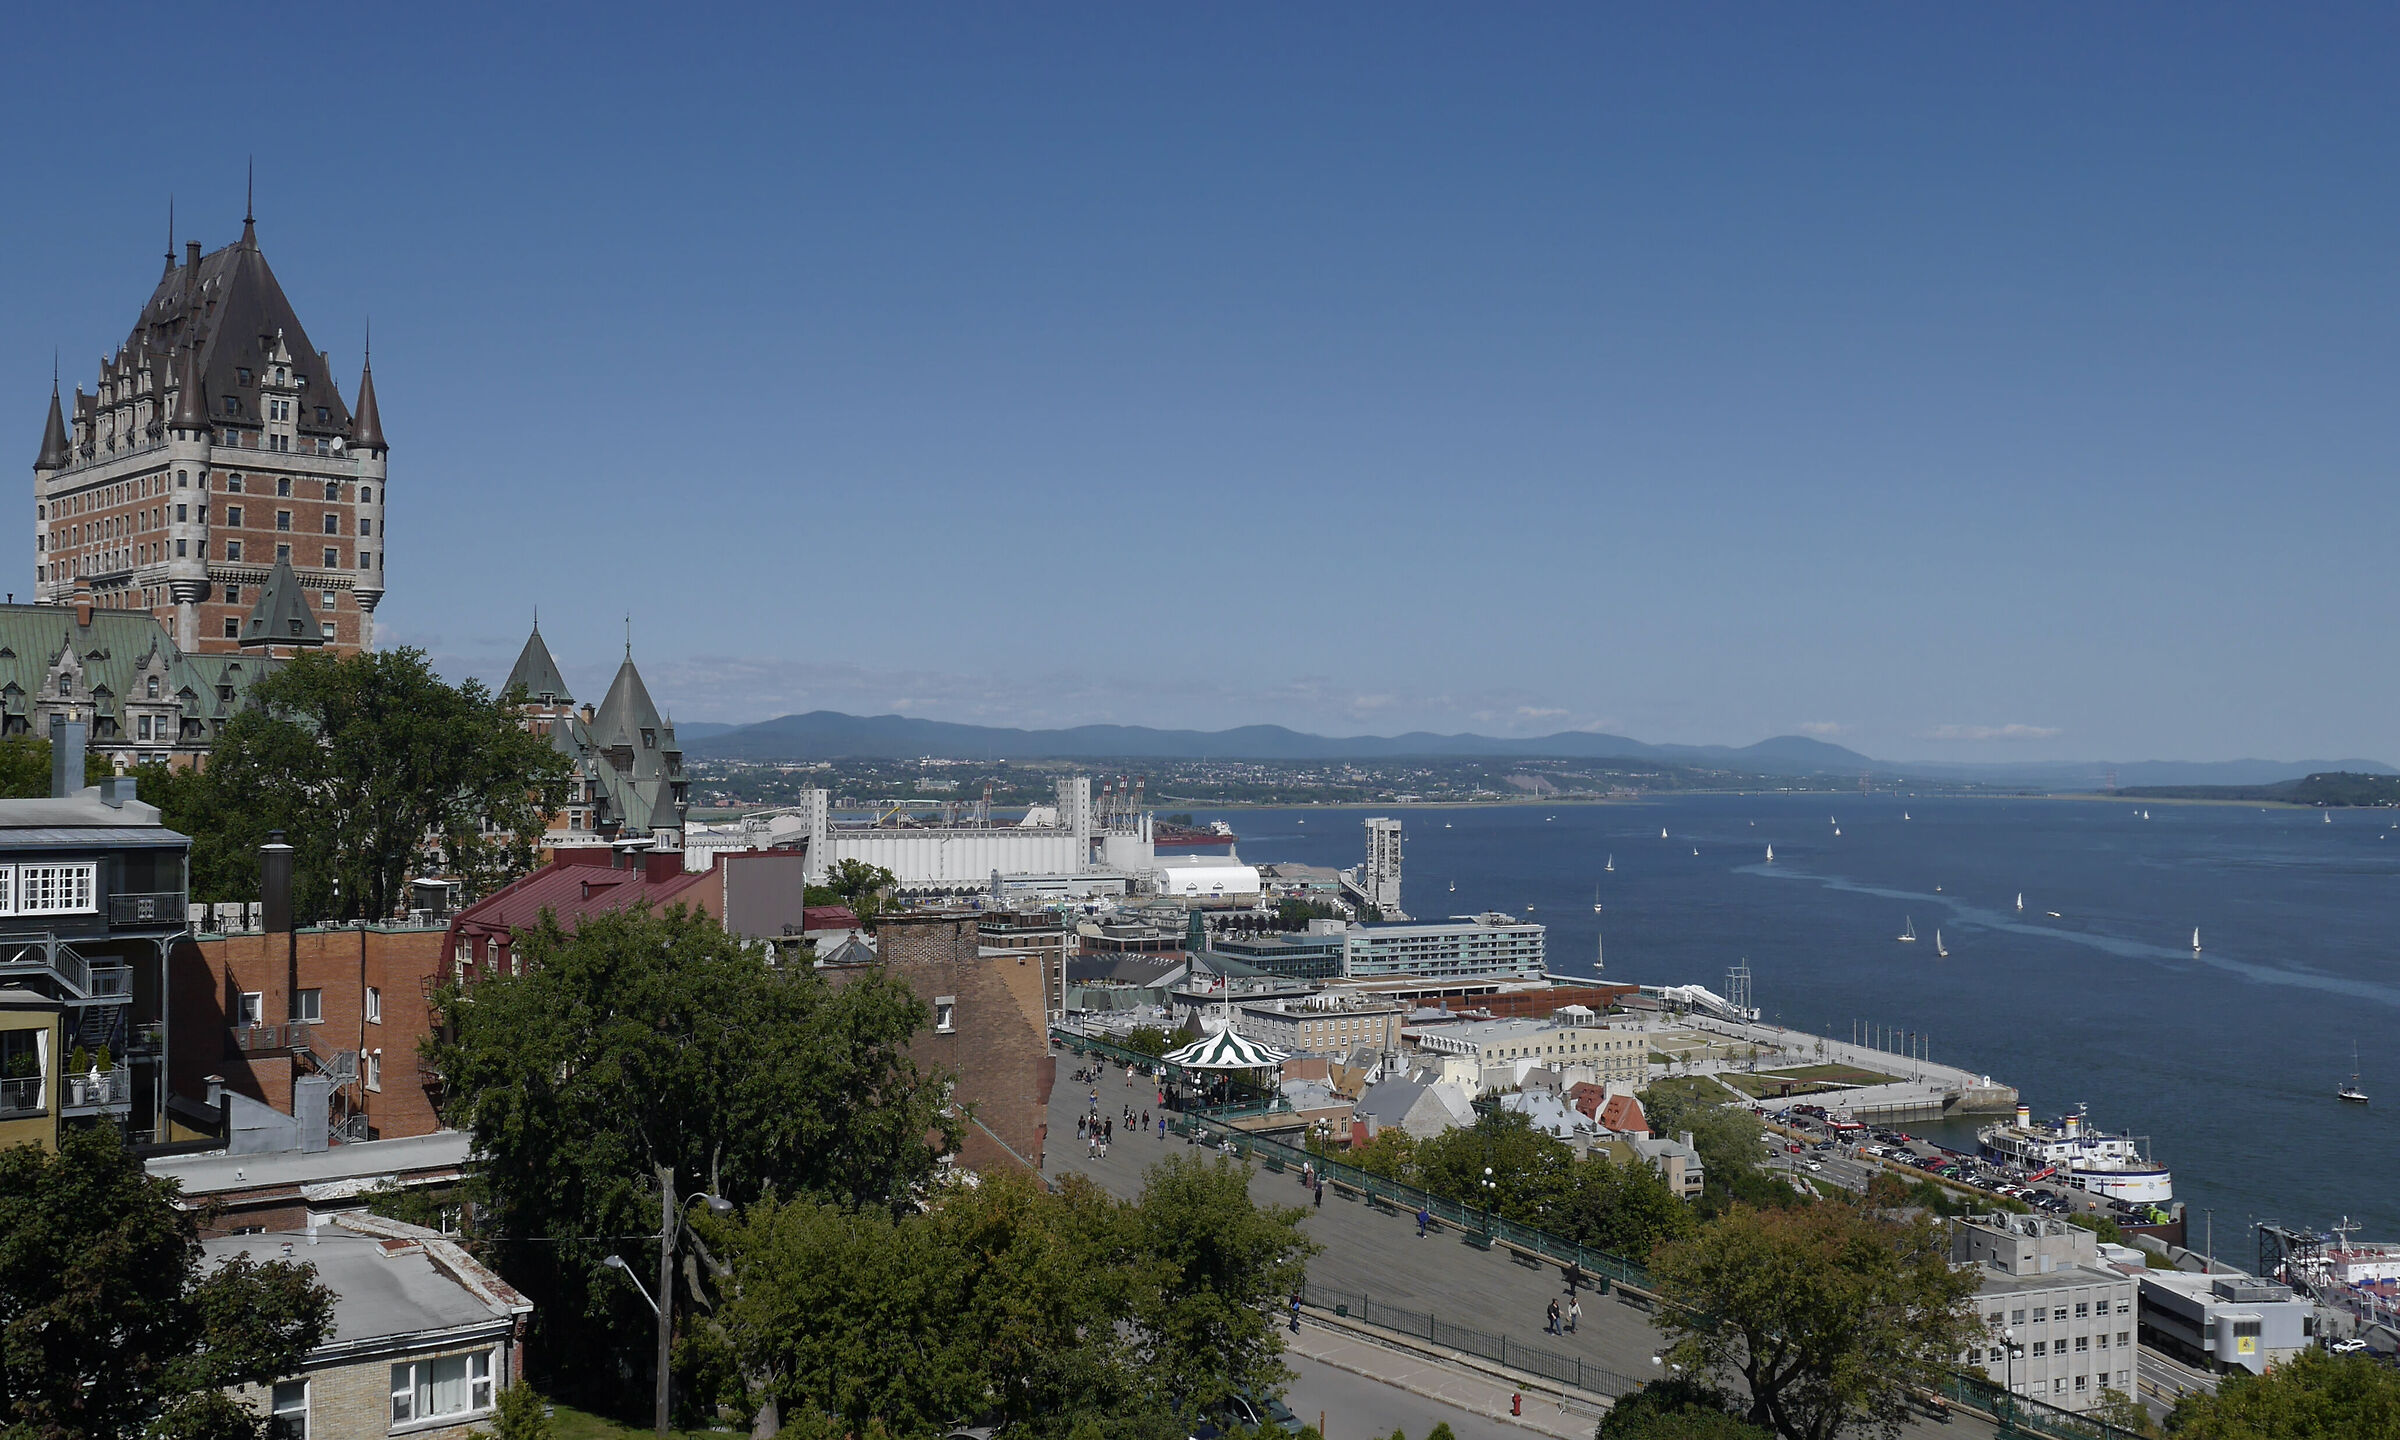 Splendid view of Old Quebec, Castel Frontenac and River...